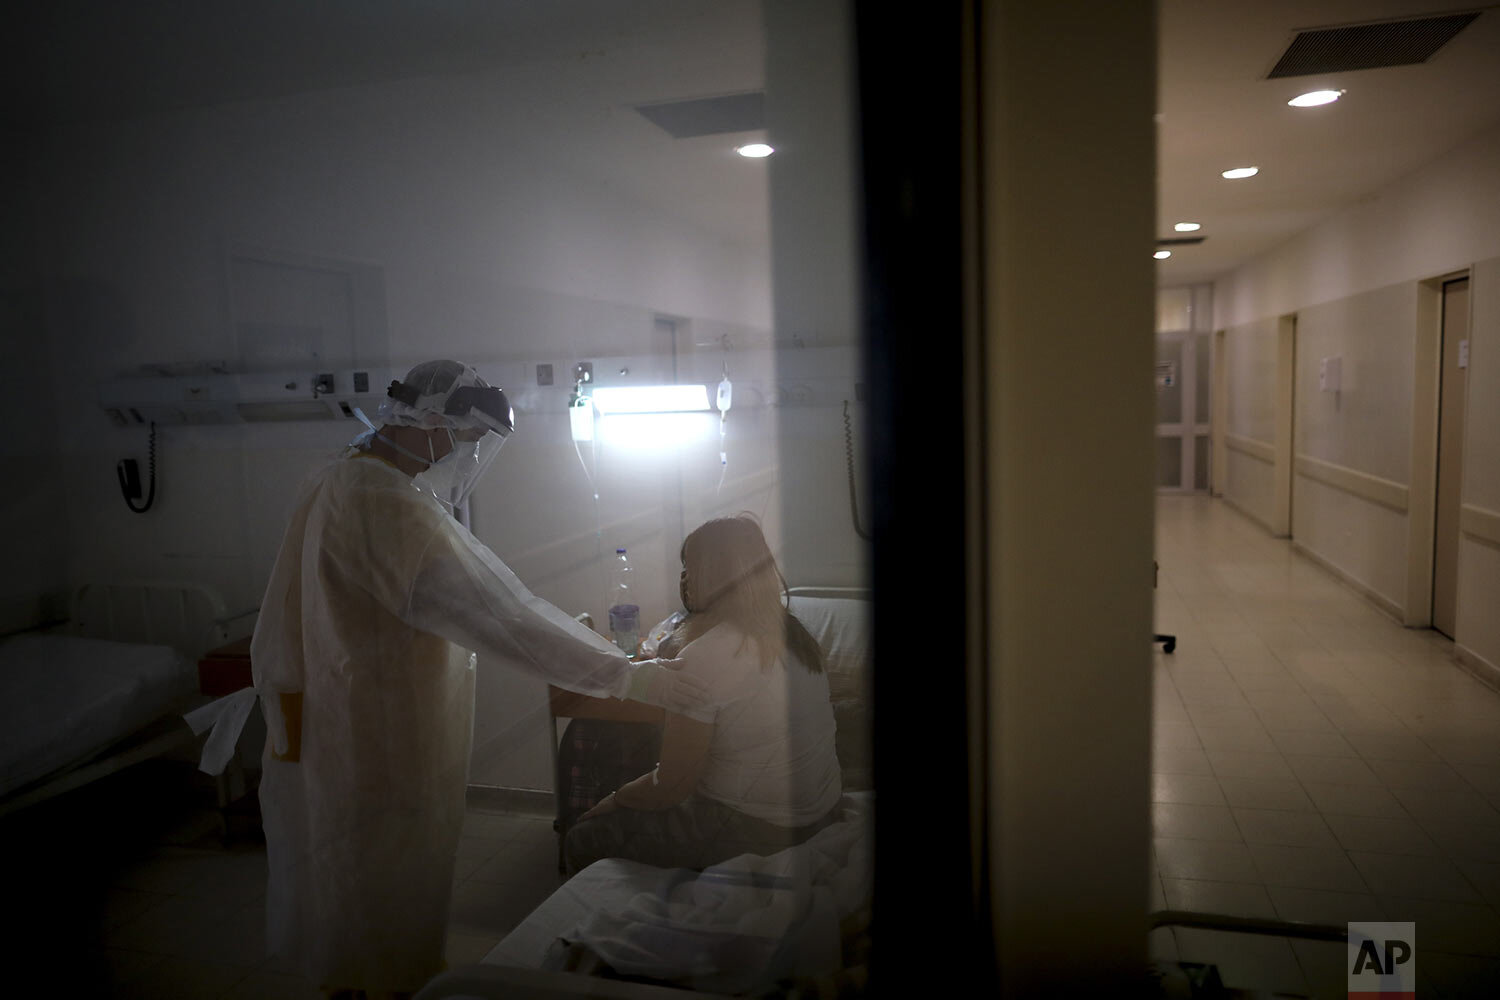  Dr. Juan Jose Comas attends to a patient infected with COVID-19 at the Ezeiza Hospital, southwest of Buenos Aires, Argentina, Thursday, July 16, 2020. (AP Photo/Natacha Pisarenko) 